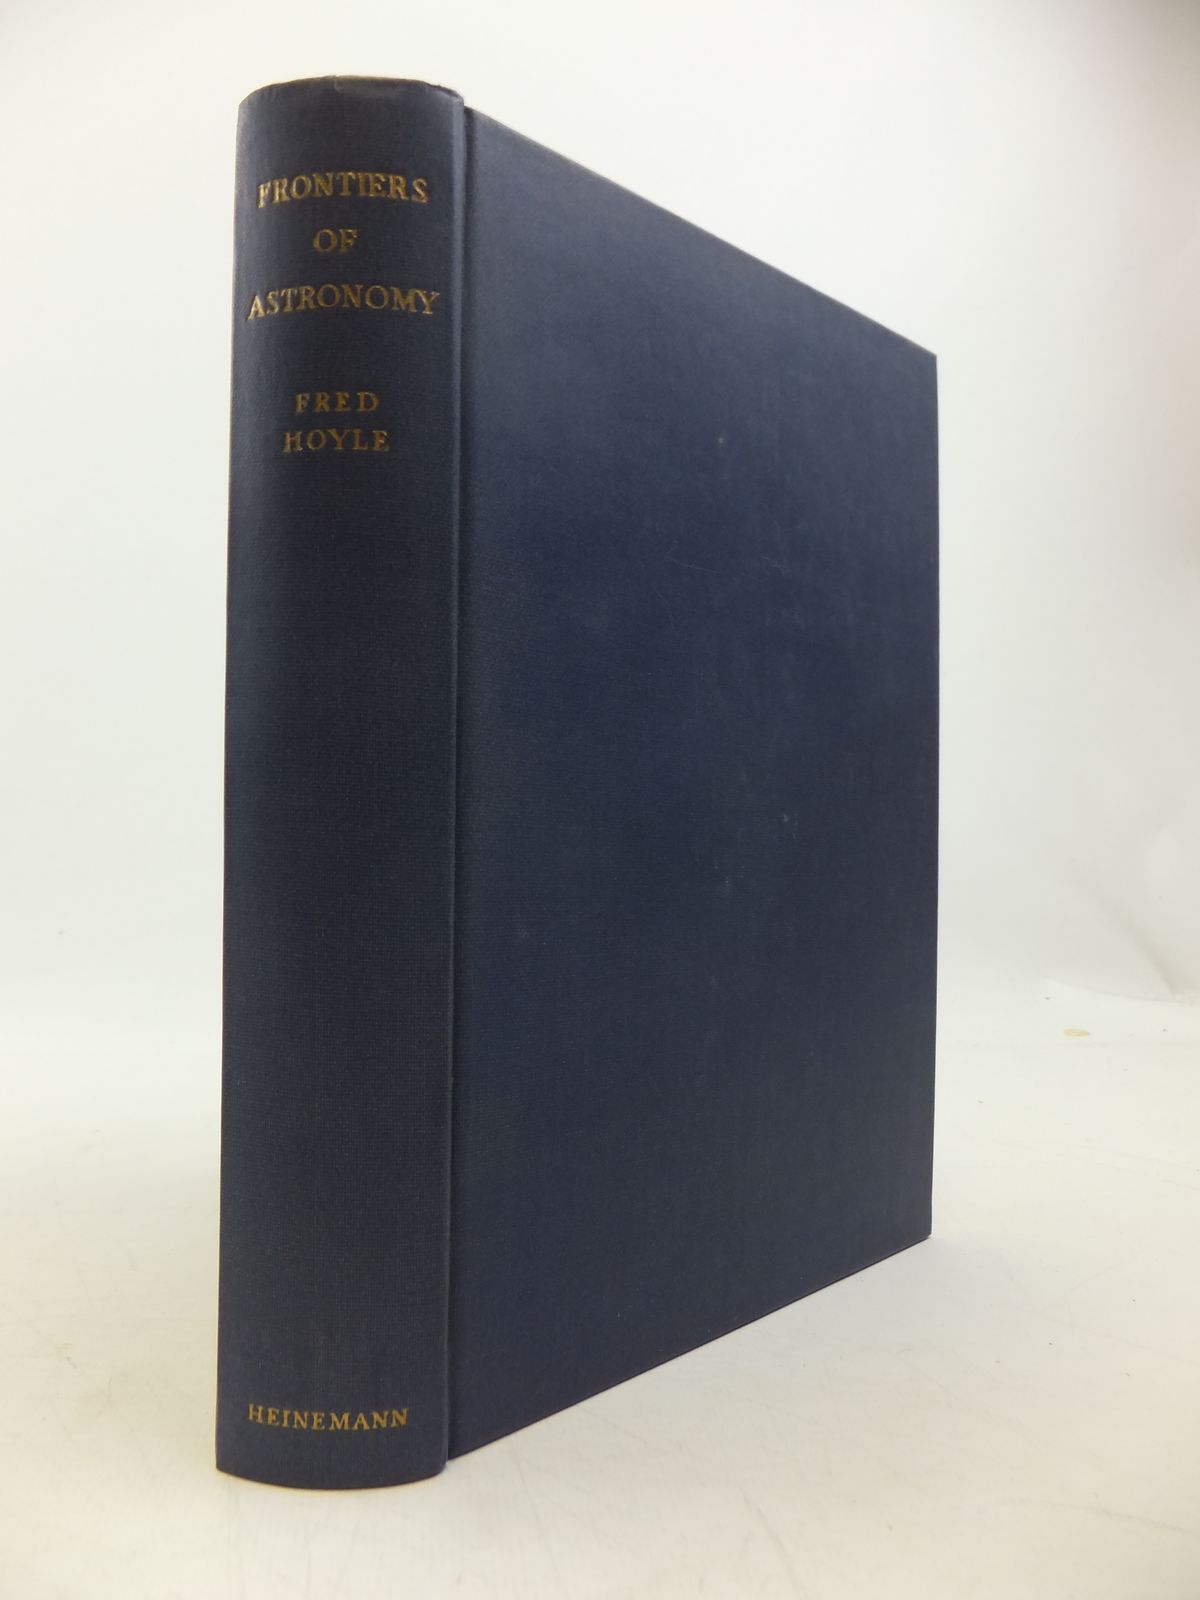 Photo of FRONTIERS OF ASTRONOMY written by Hoyle, Fred published by William Heinemann Ltd. (STOCK CODE: 1811415)  for sale by Stella & Rose's Books